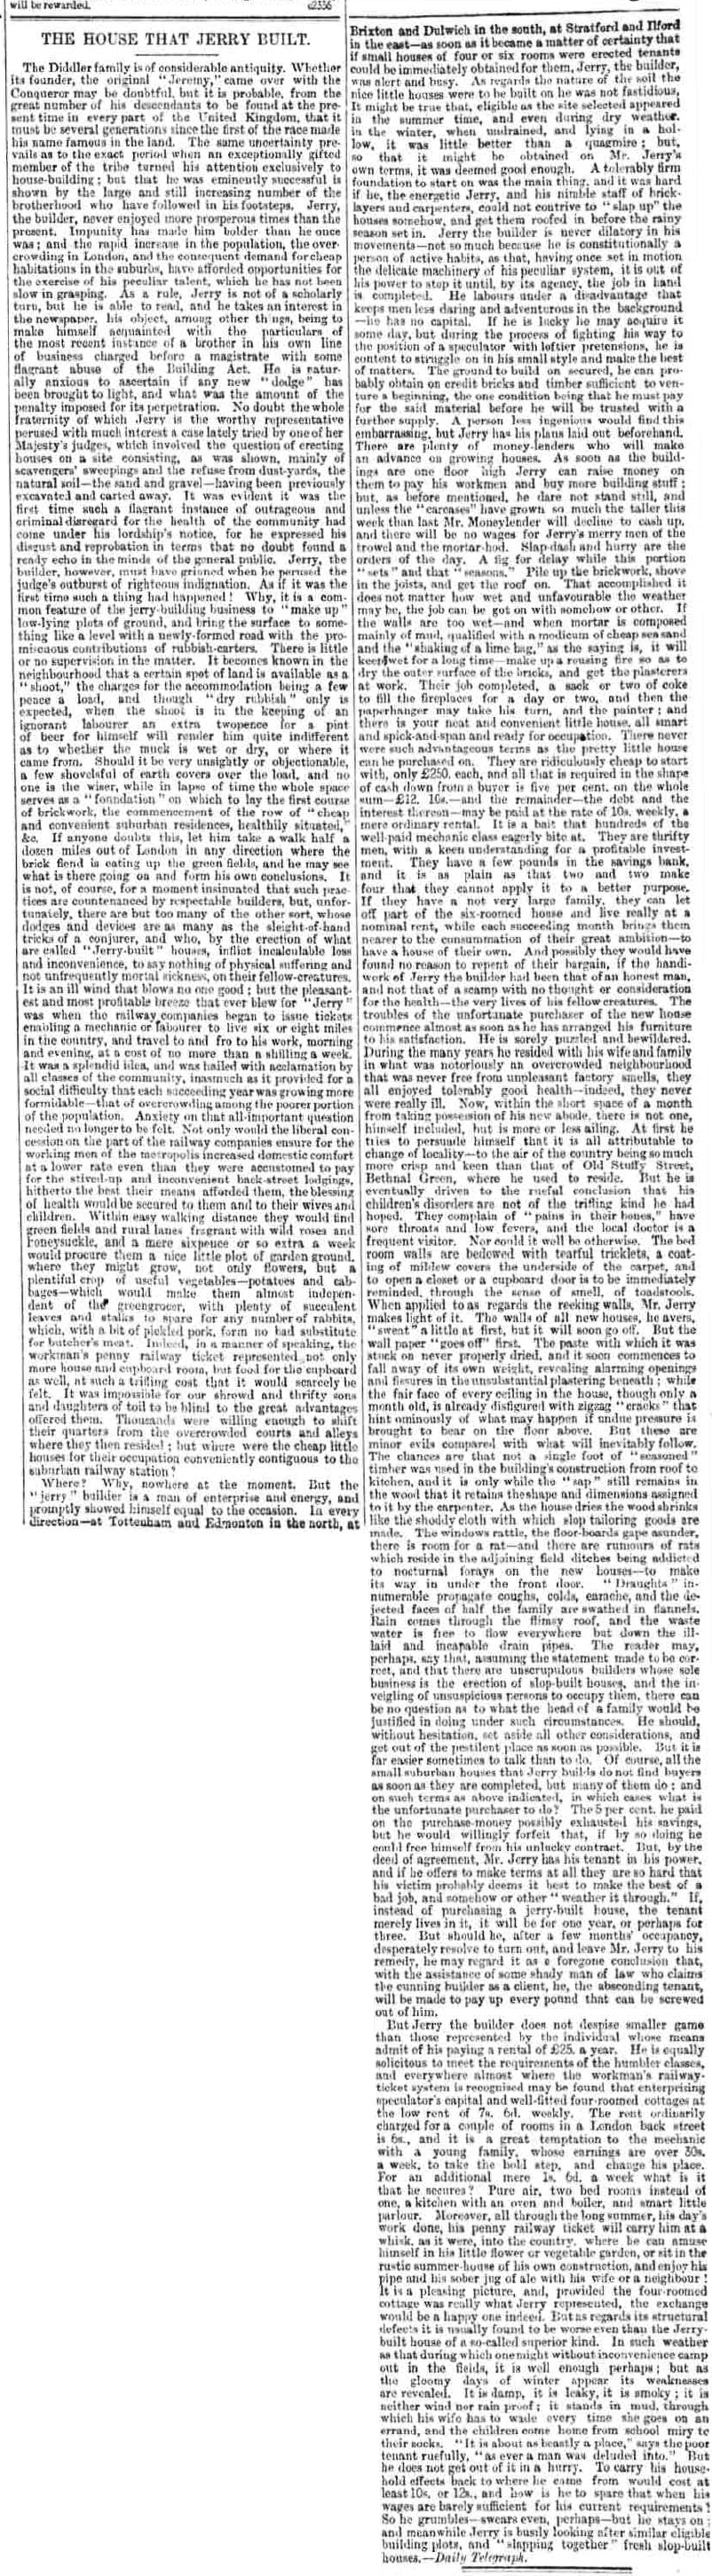 Jerry Diddler Birmingham Daily Post 27 March 1883